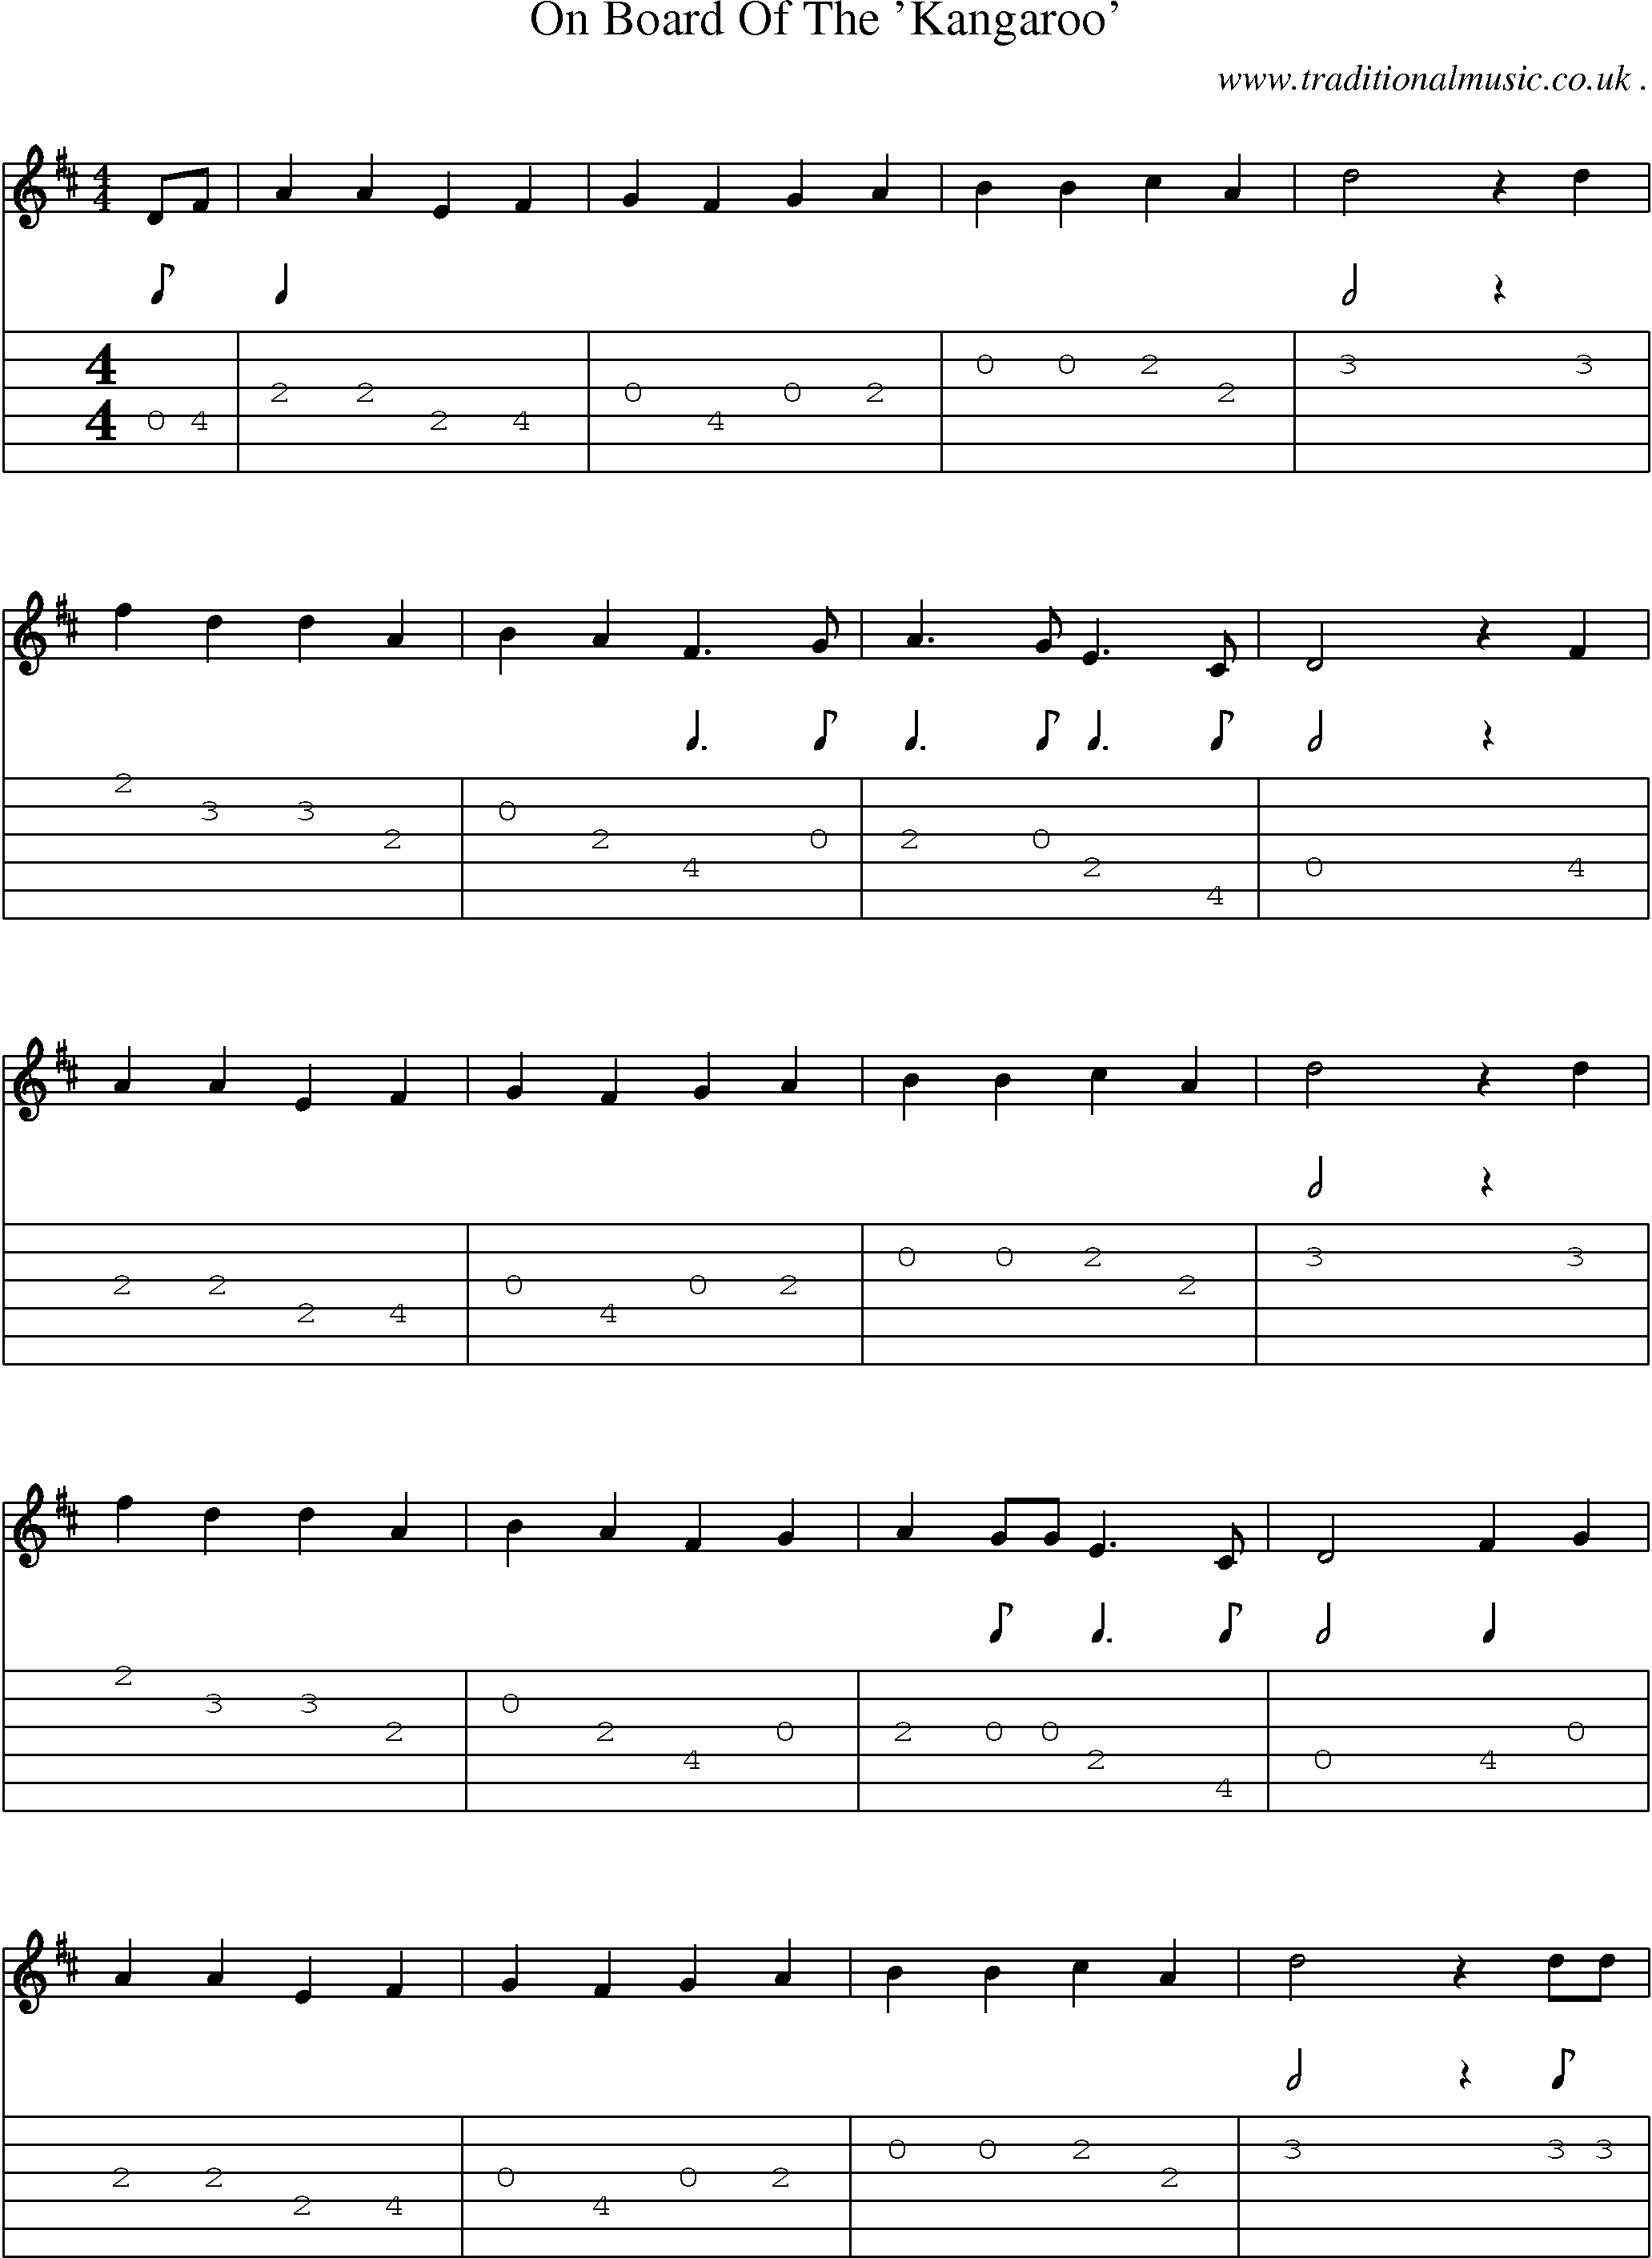 Sheet-Music and Guitar Tabs for On Board Of The Kangaroo